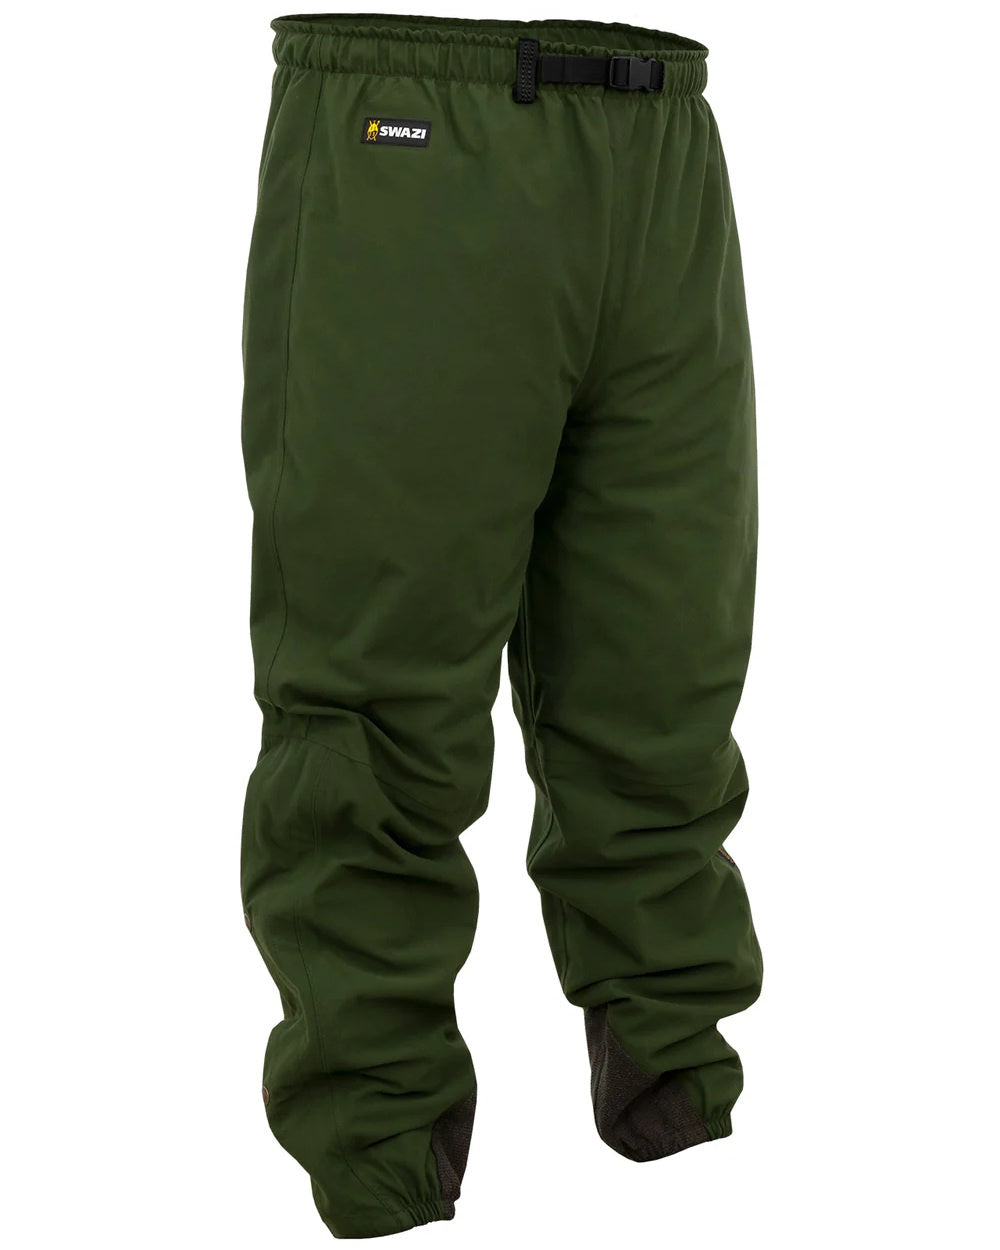 Olive Coloured Swazi Overpants On A White Background 